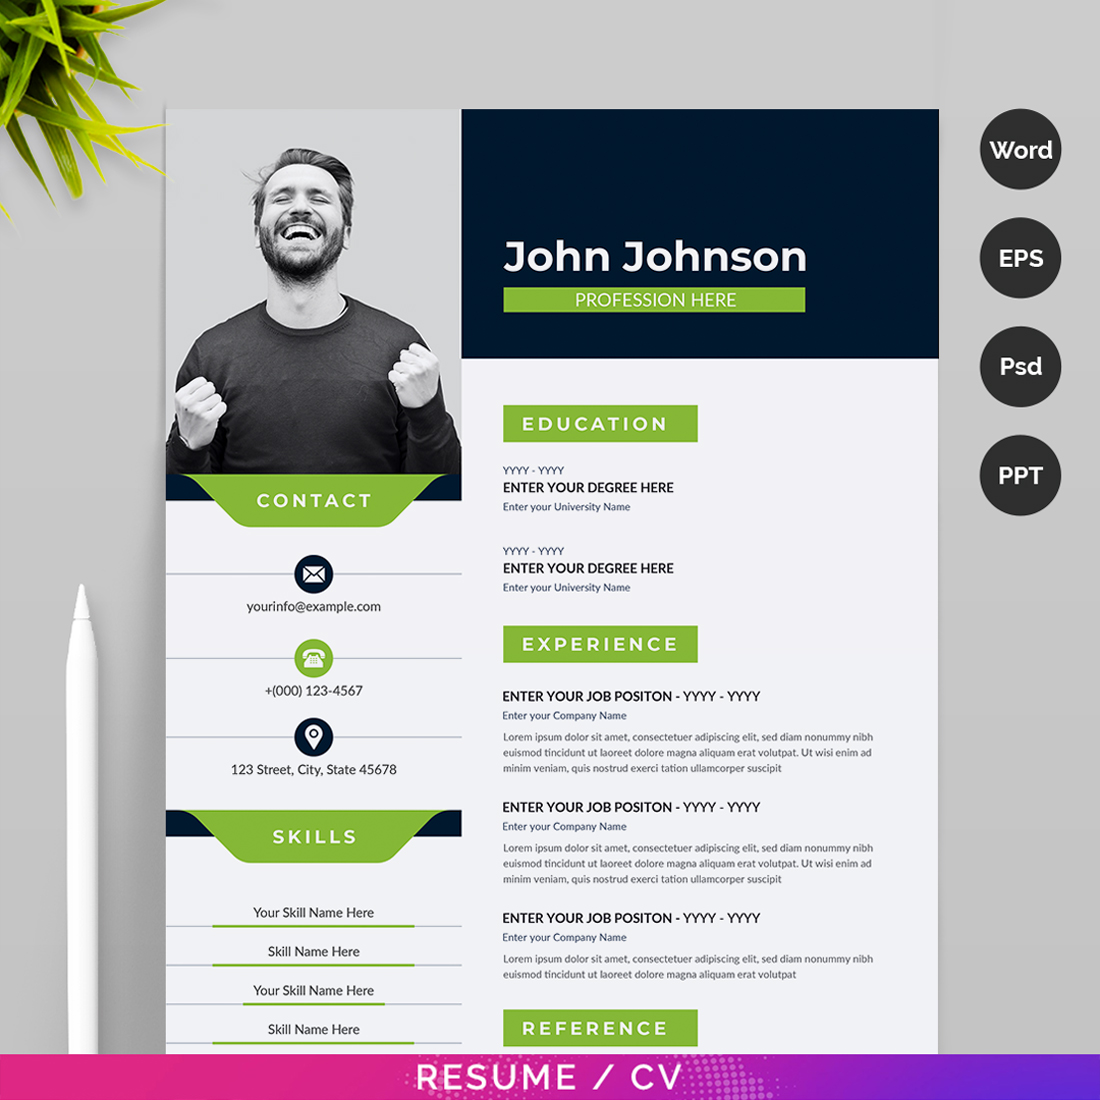 Professional resume template with a green and black color scheme.